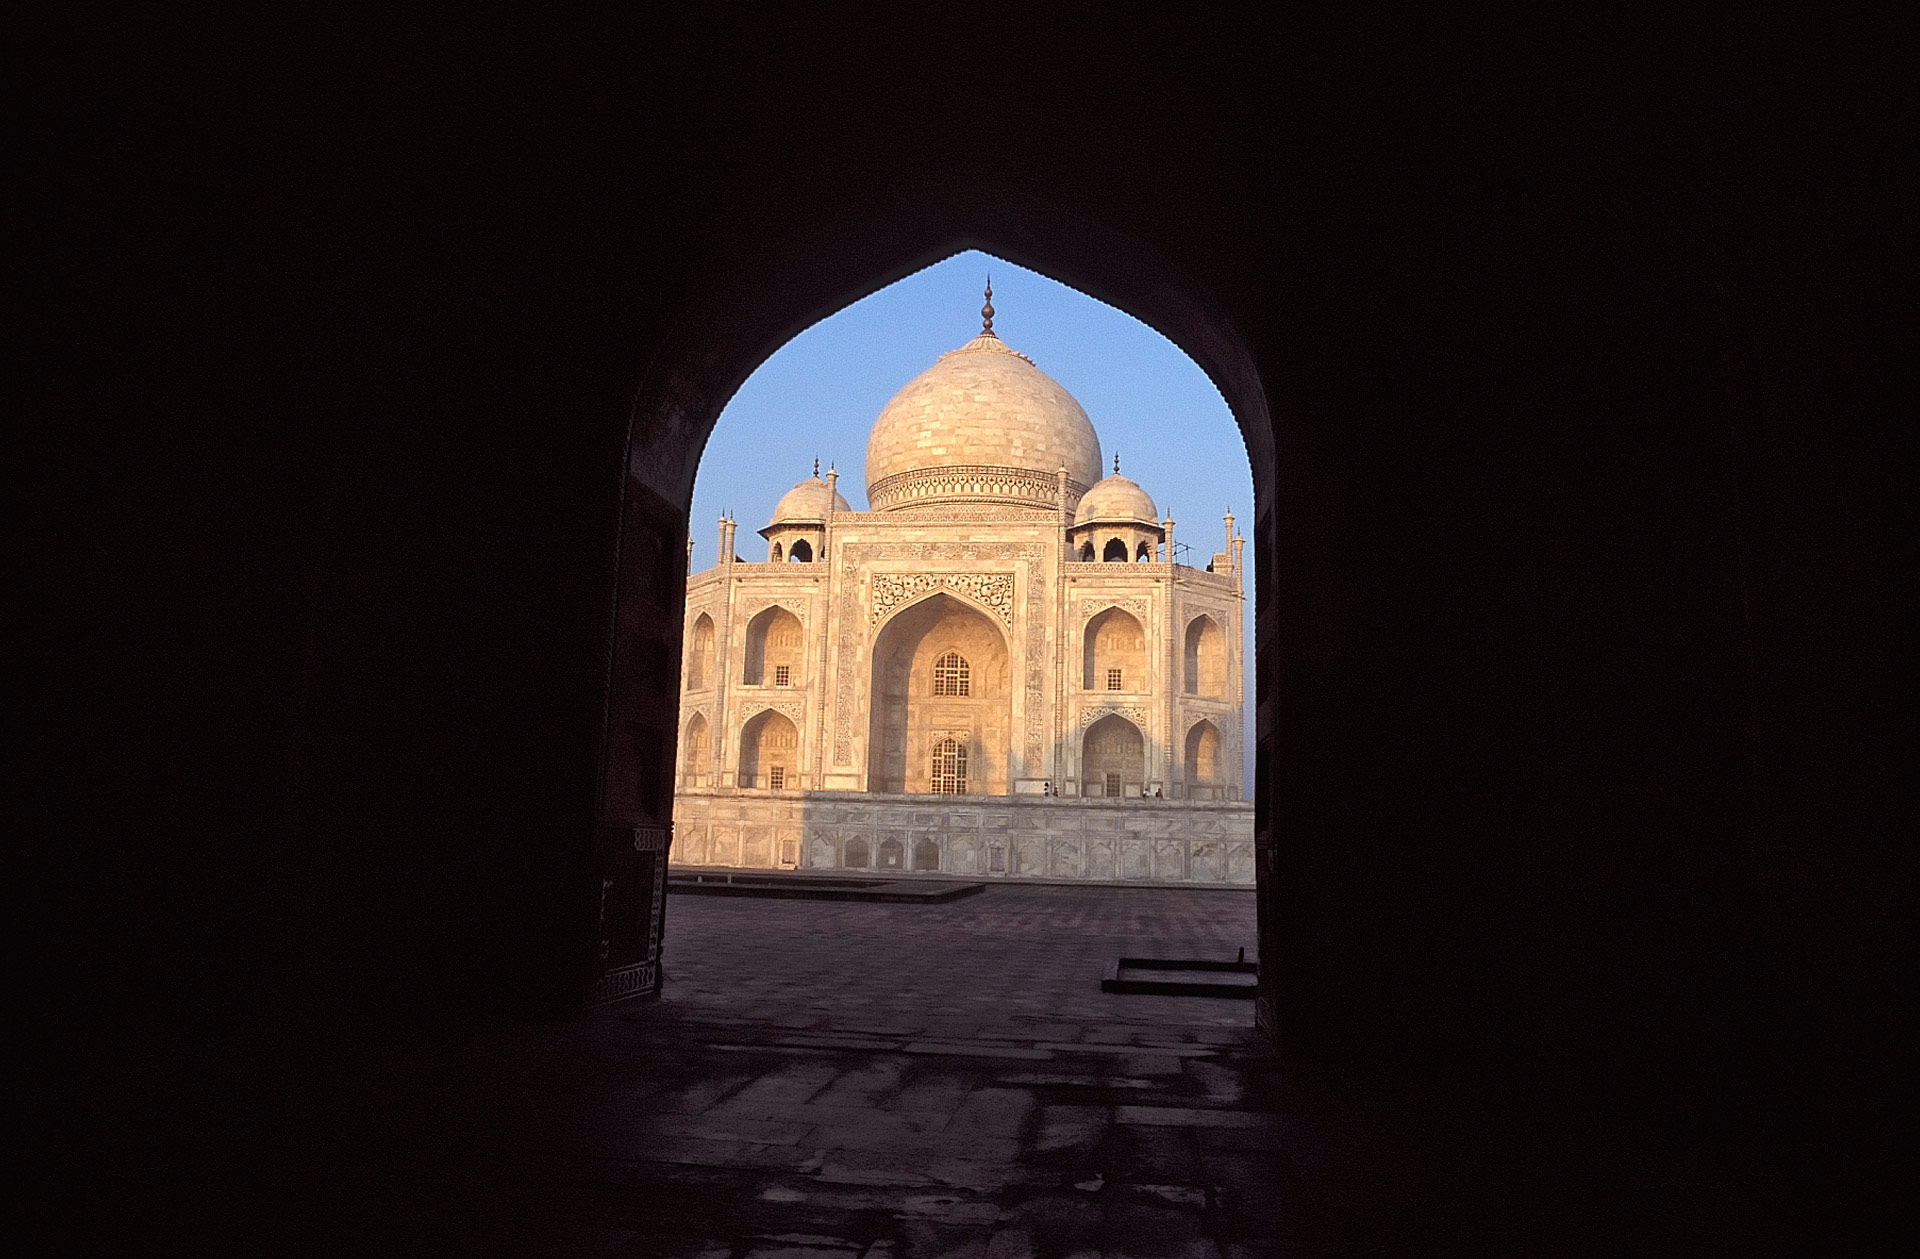 Taj Mahal, as seen from an archway at the lateral mosque, Agra, Uttar Pradesh, India